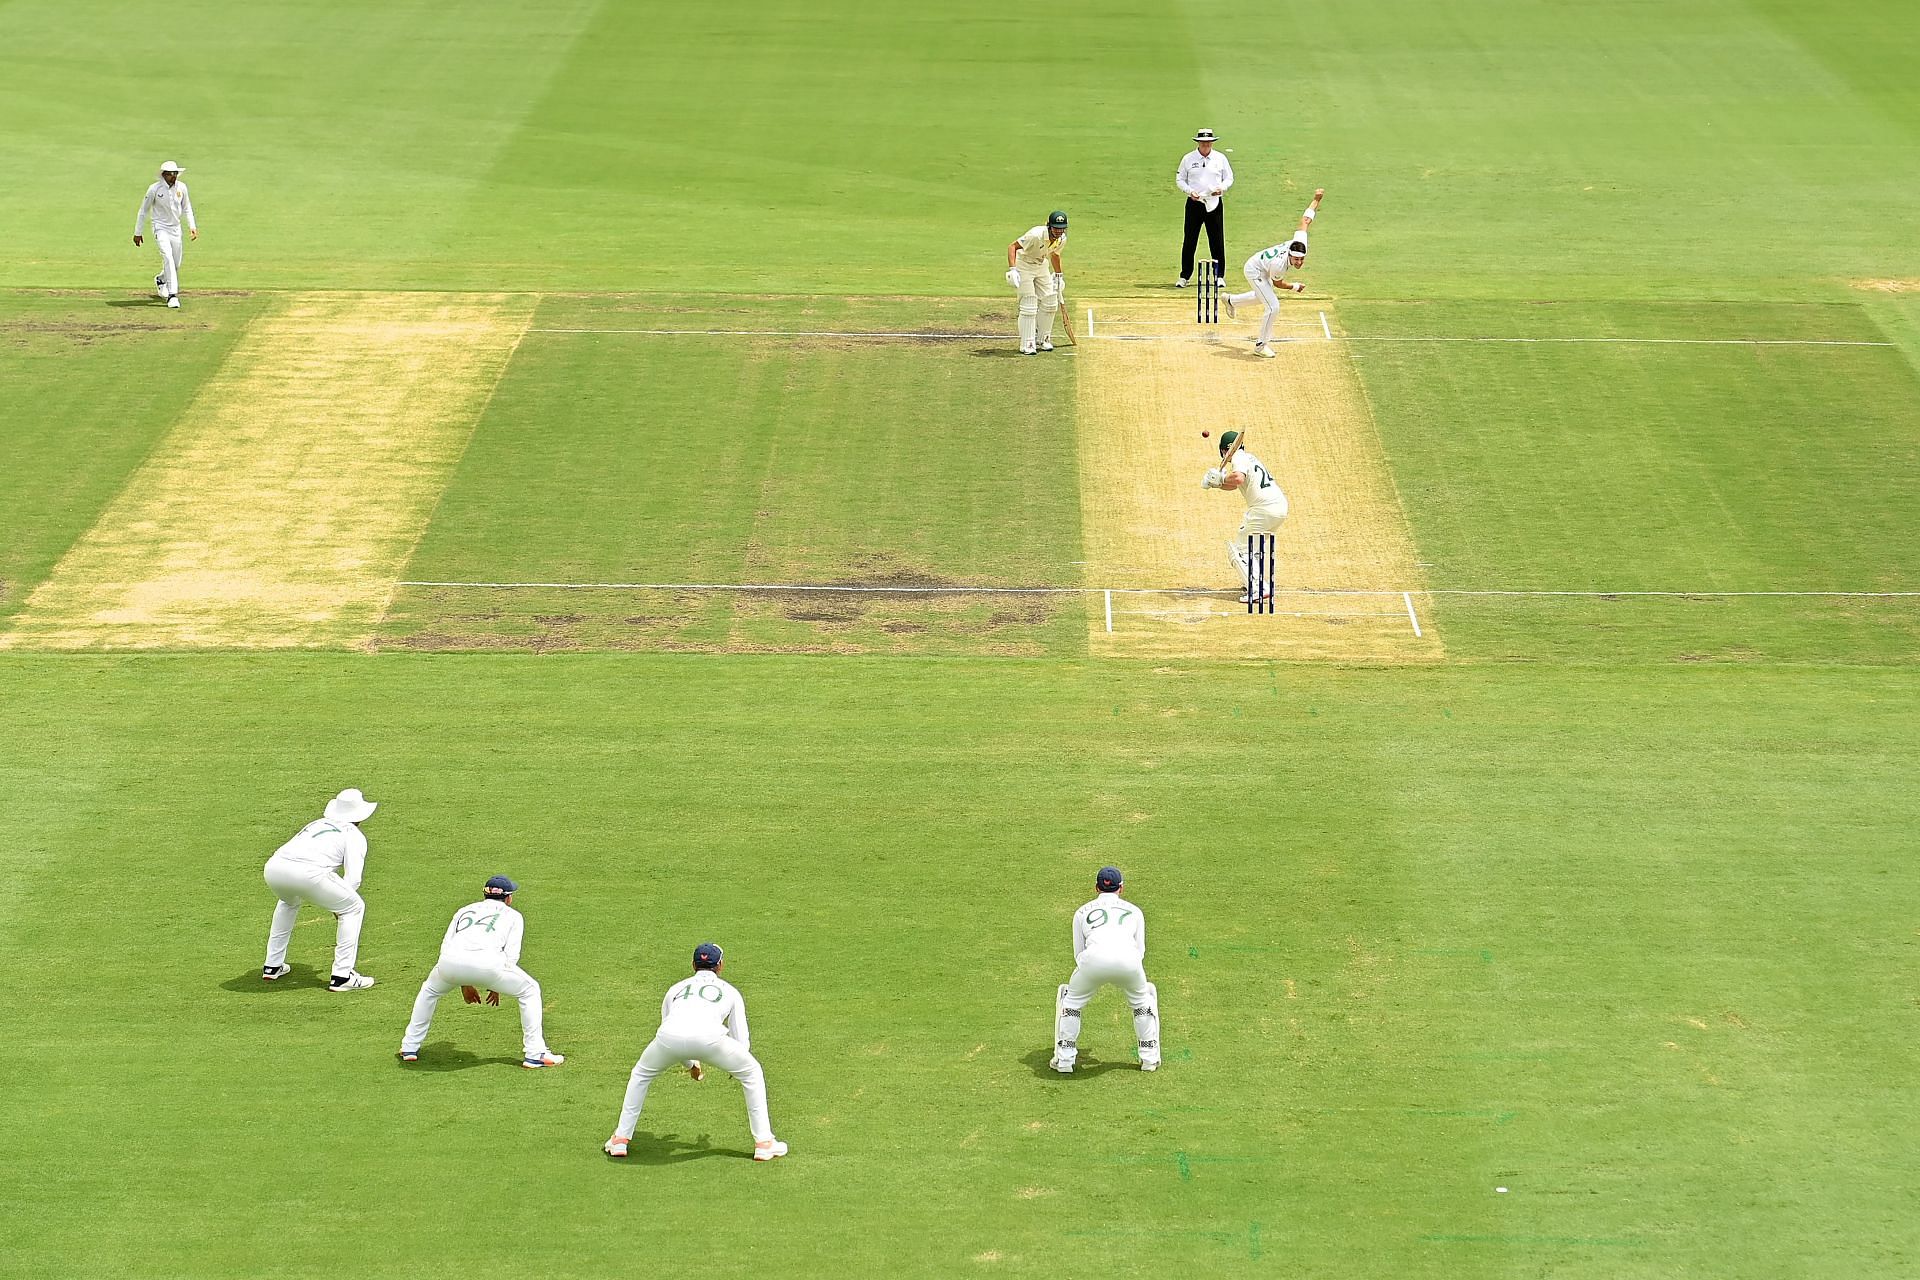 South Africa having many slips should be a common occurence during the Test series.